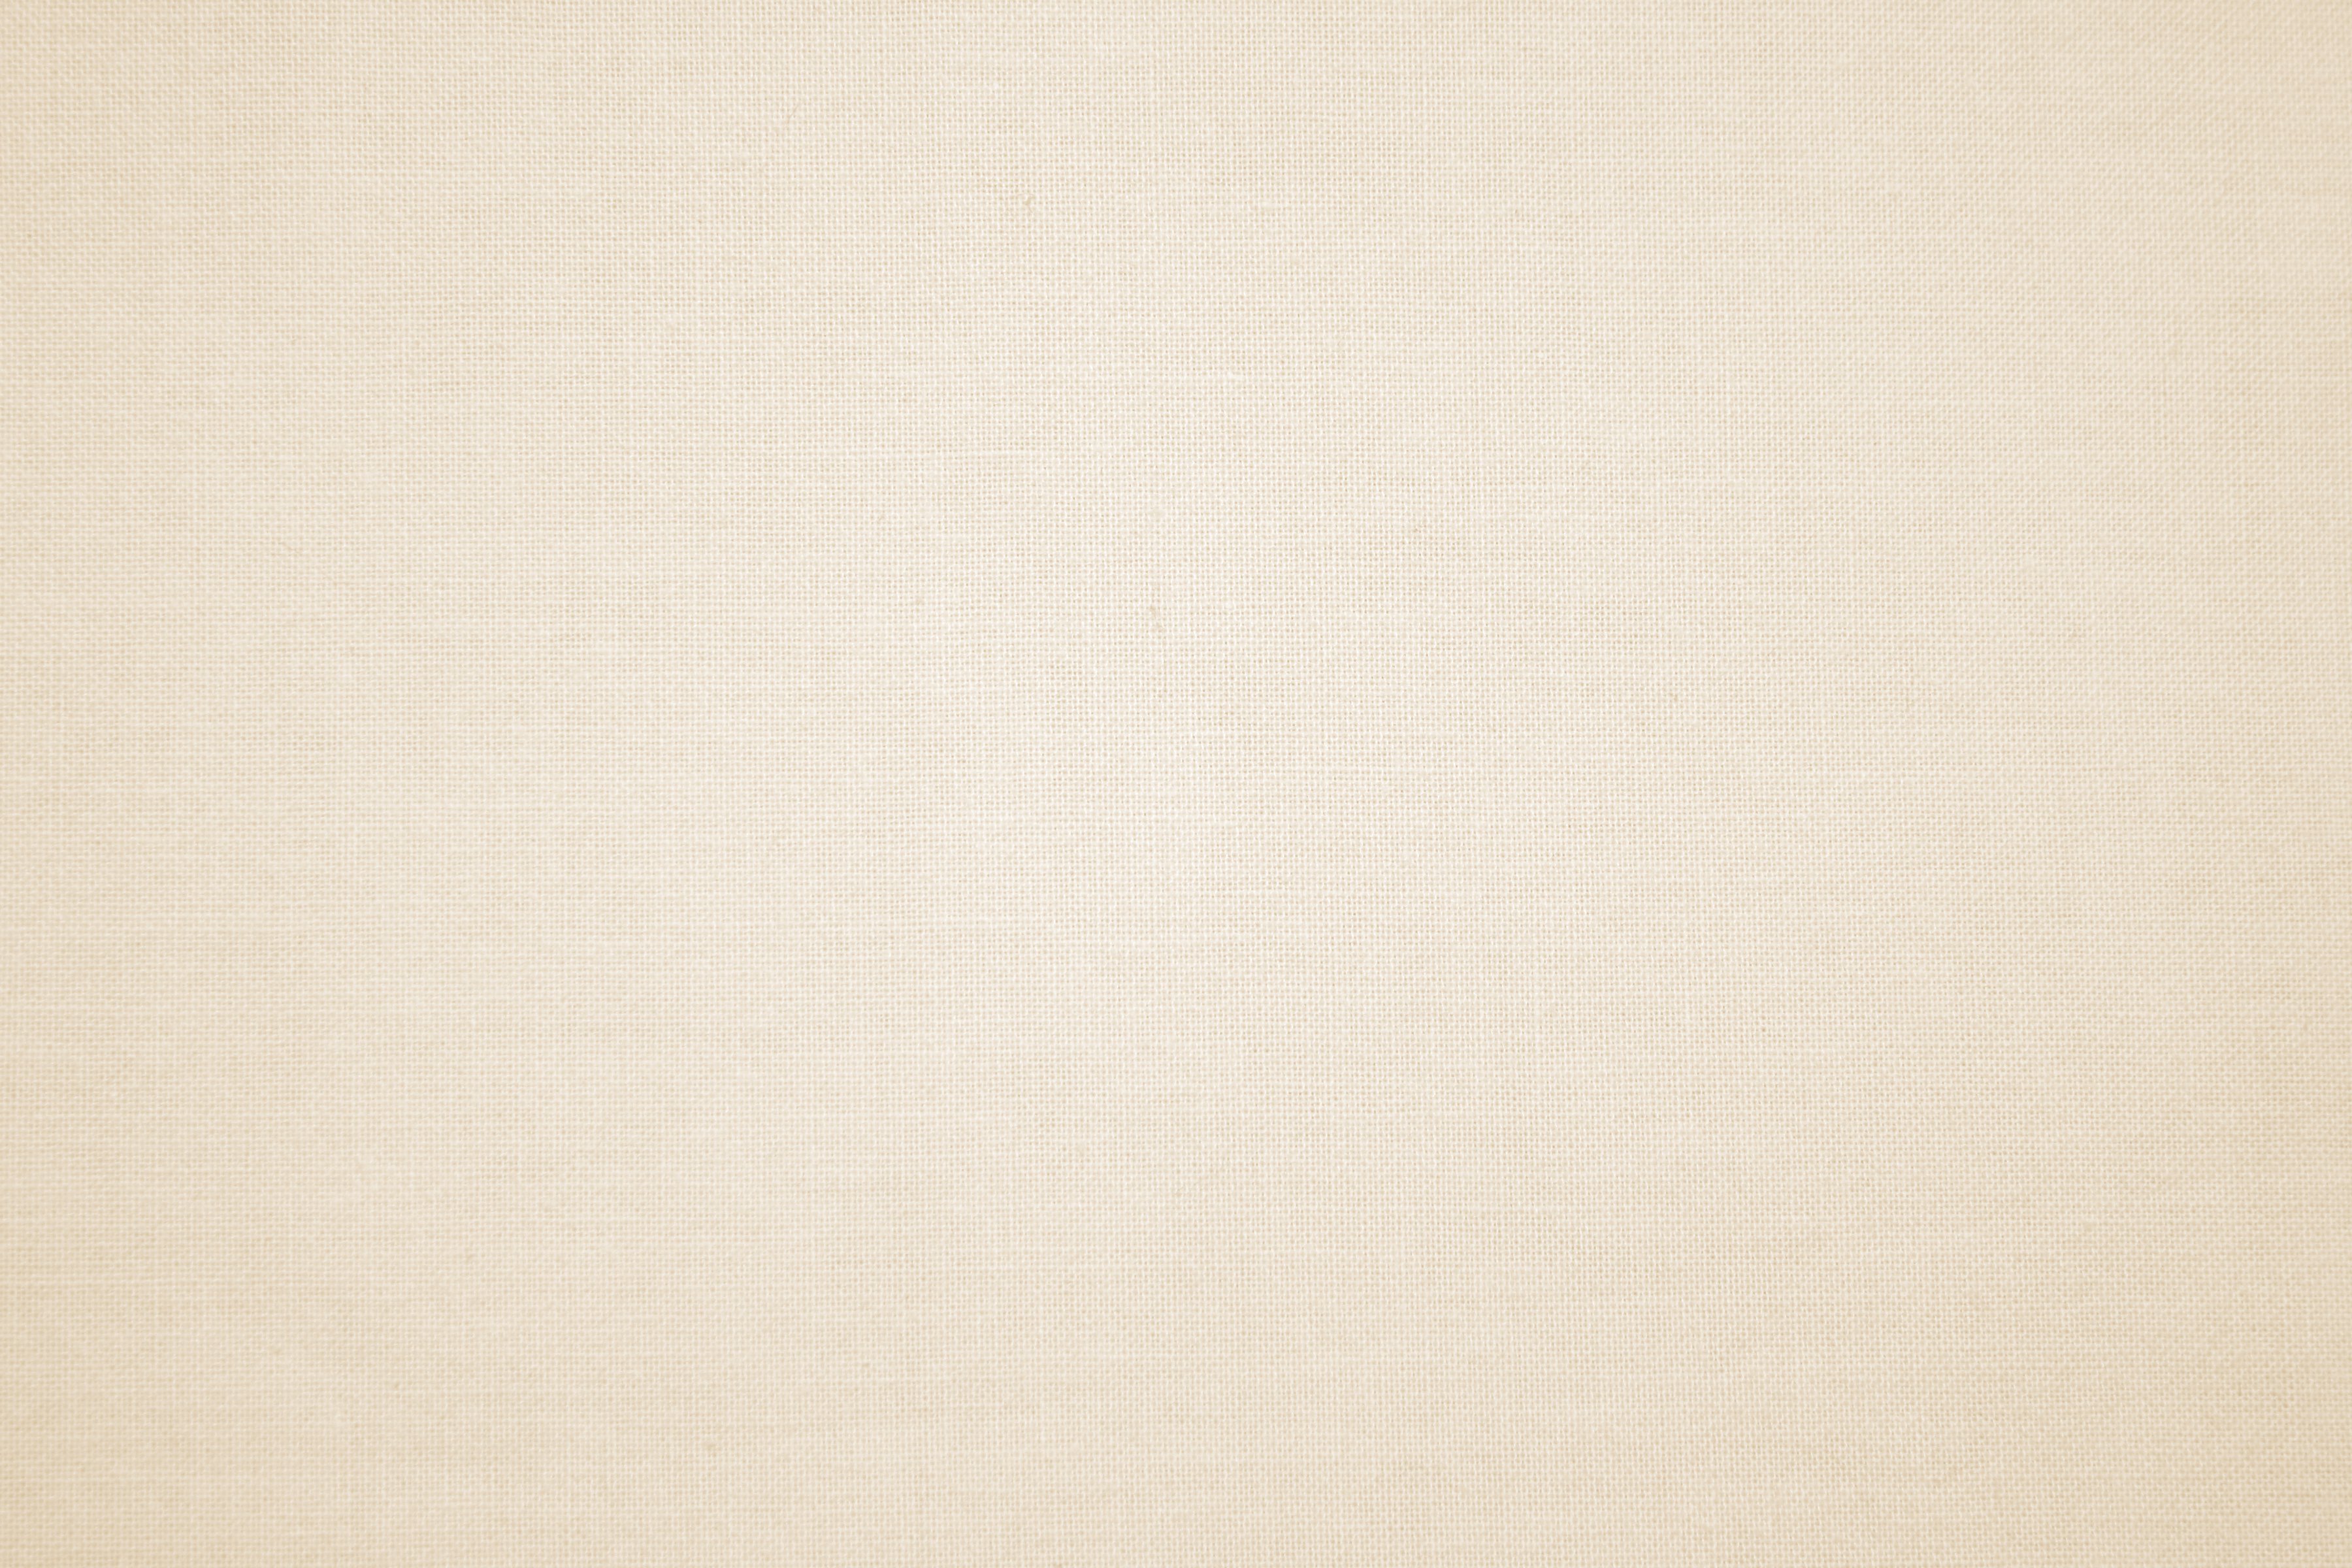 Beige Colored S Fabric Texture Picture Photograph Photos